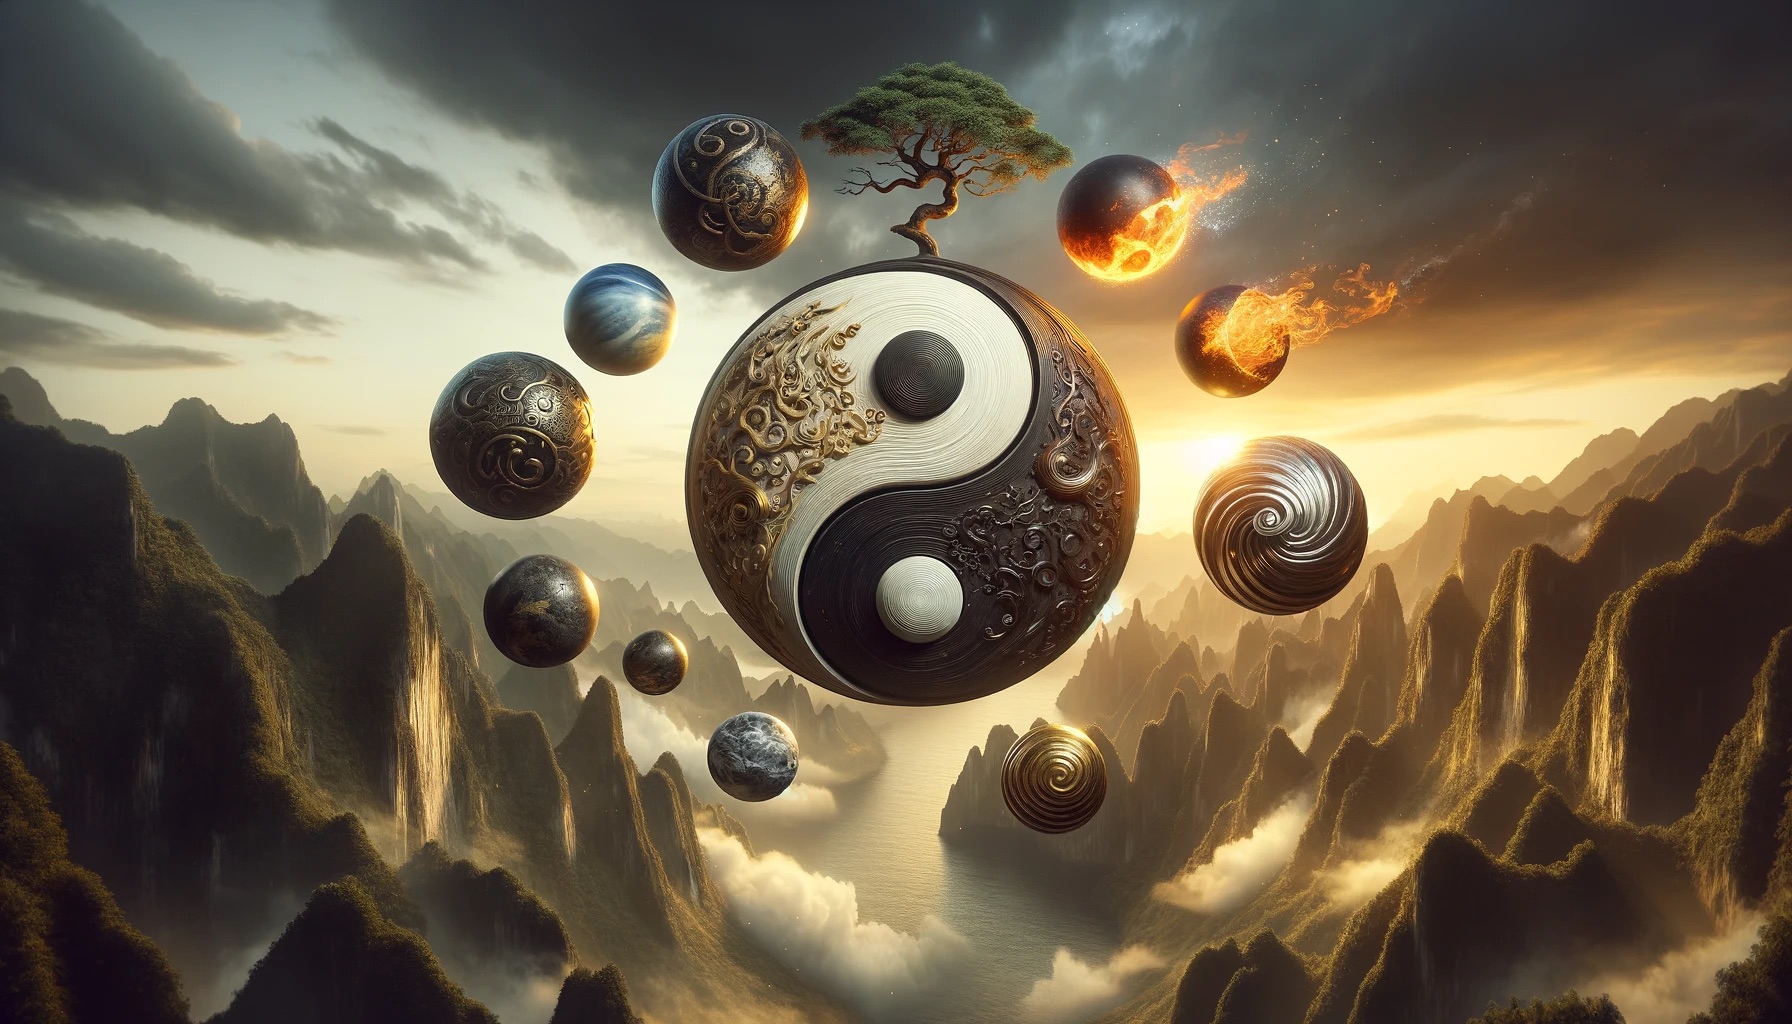 Dall·e 2024 02 20 17.22.04 Craft A Wide, High Definition 16 9 Image That Creatively Depicts The Essence Of Yin And Yang, Central To Taoist Beliefs. At The Heart Of The Image Is